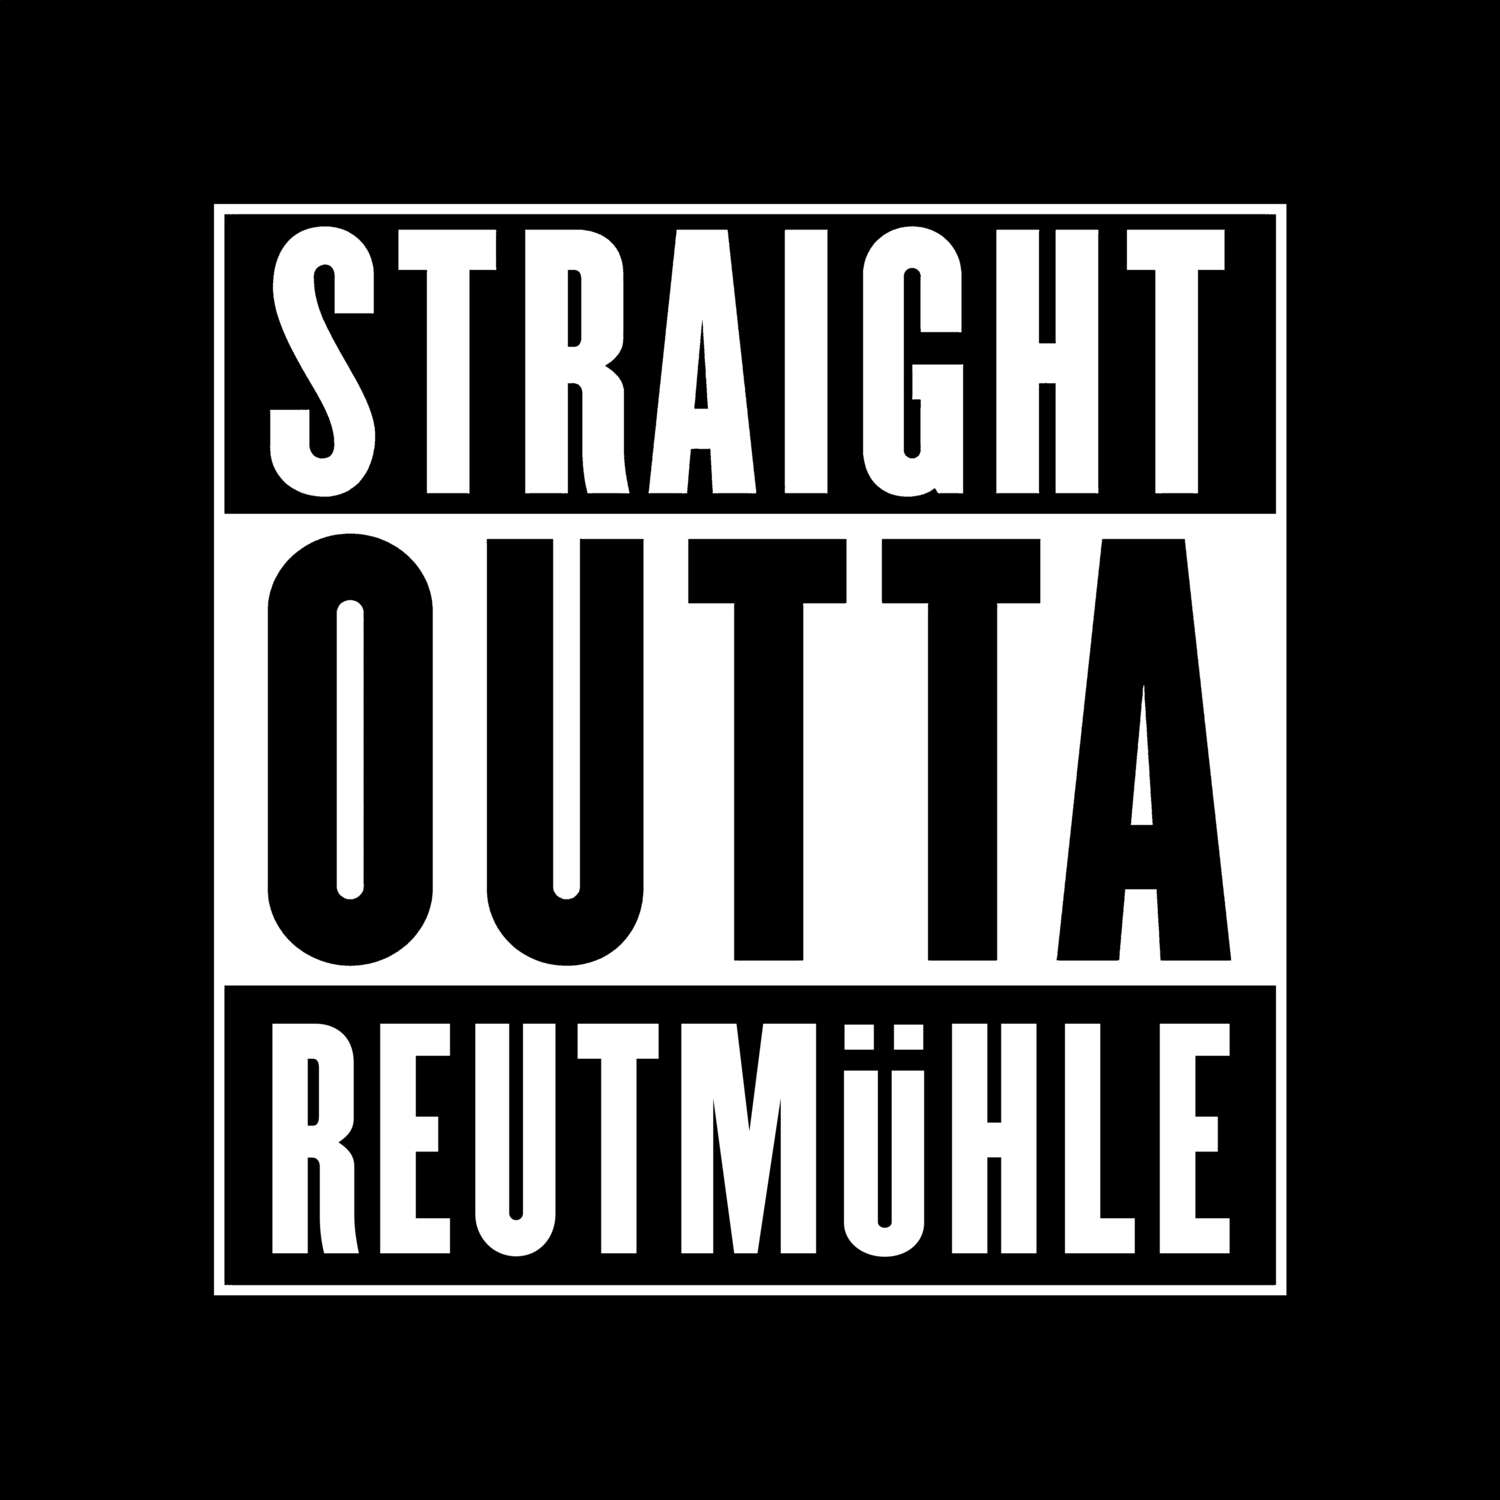 Reutmühle T-Shirt »Straight Outta«